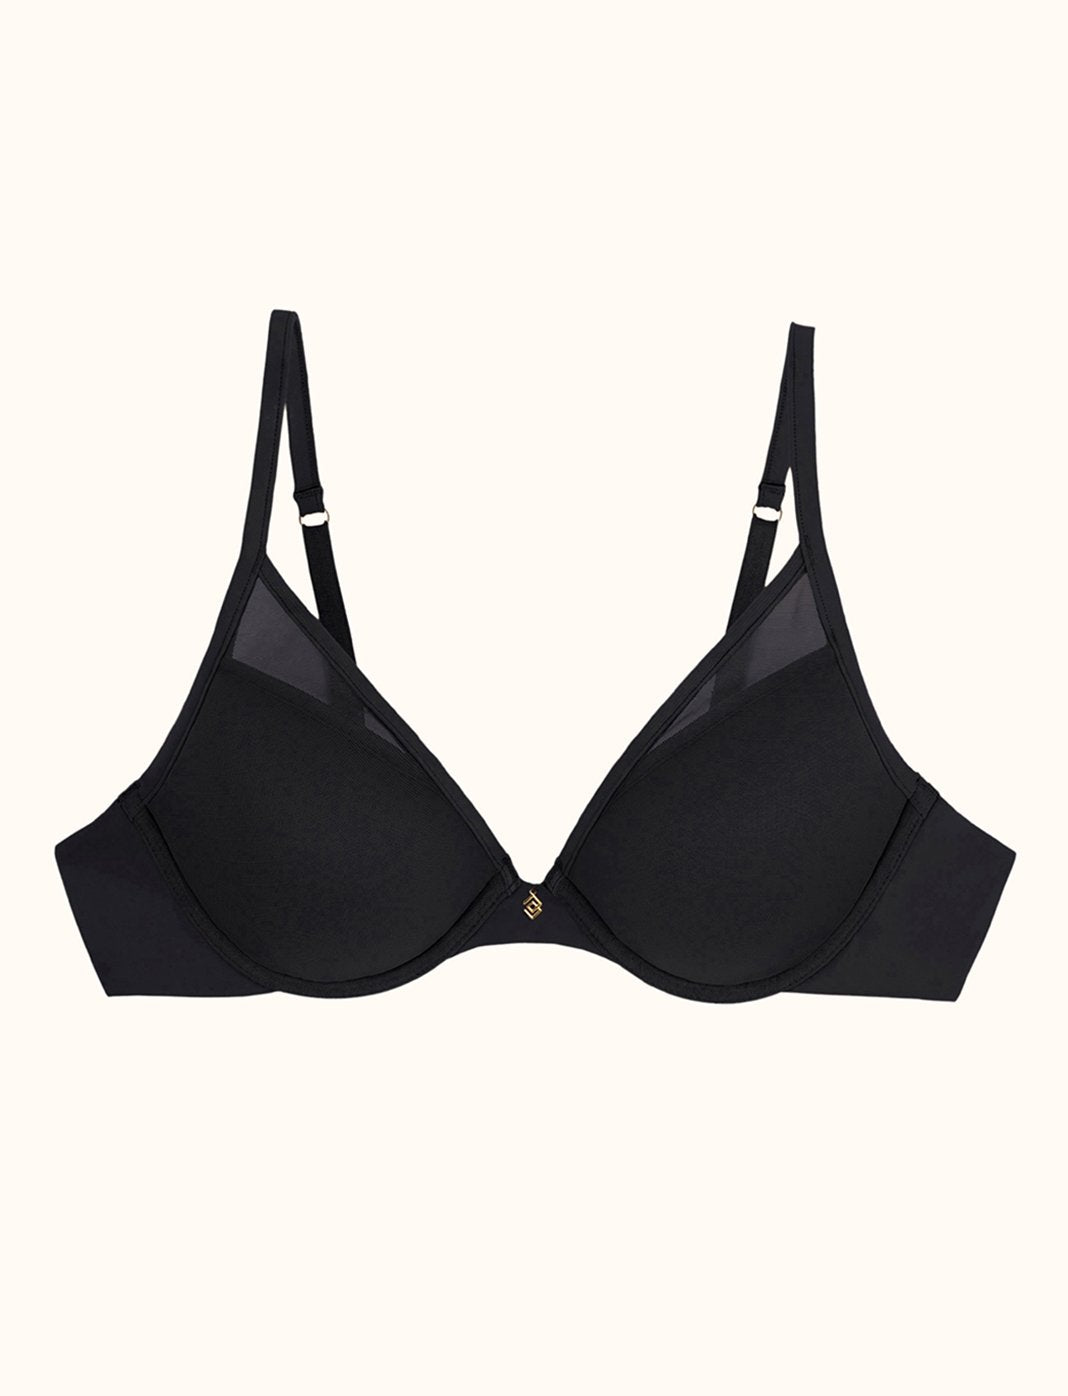 What Should I Do If My Bra Cups Are Too Roomy? - How To Tell If